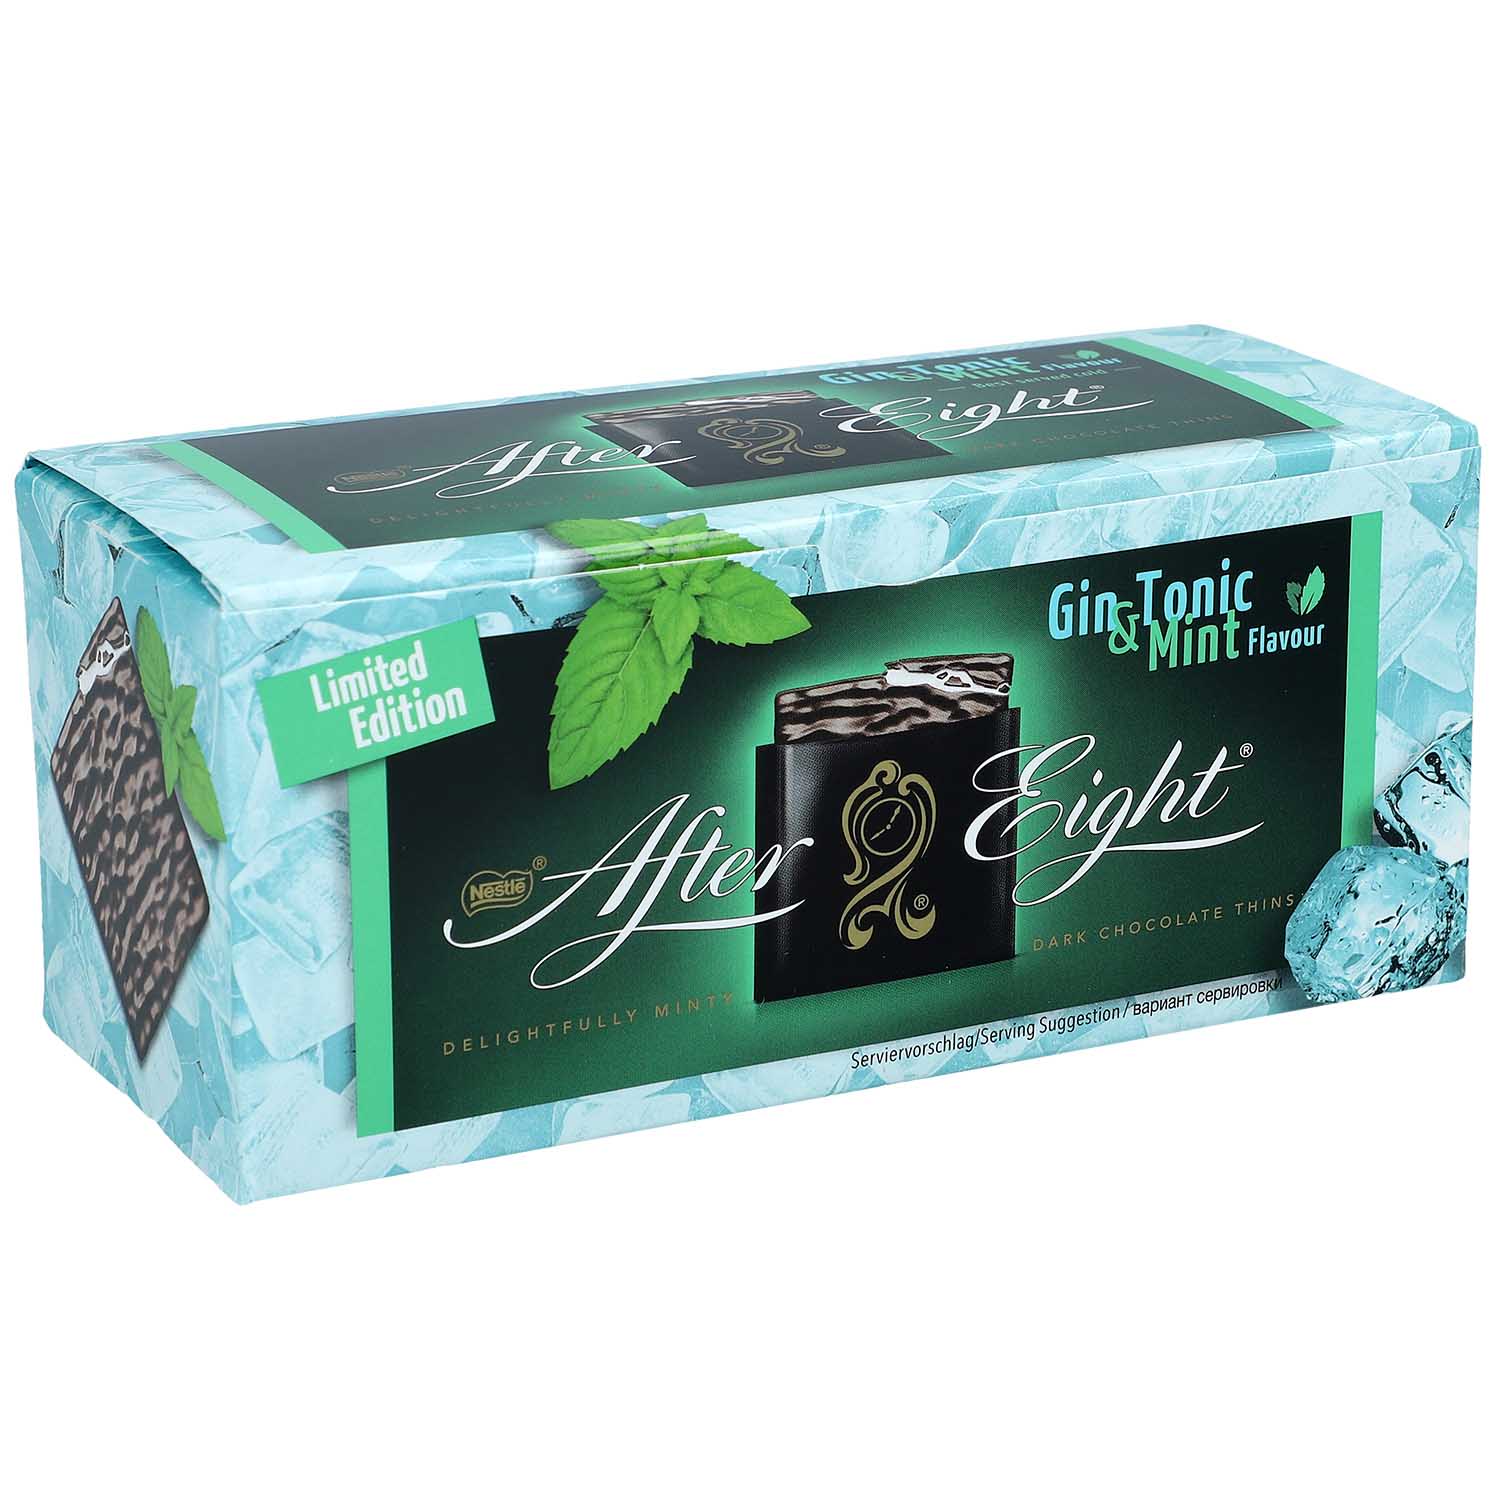 Nestle have launched limited edition gin and tonic flavoured After